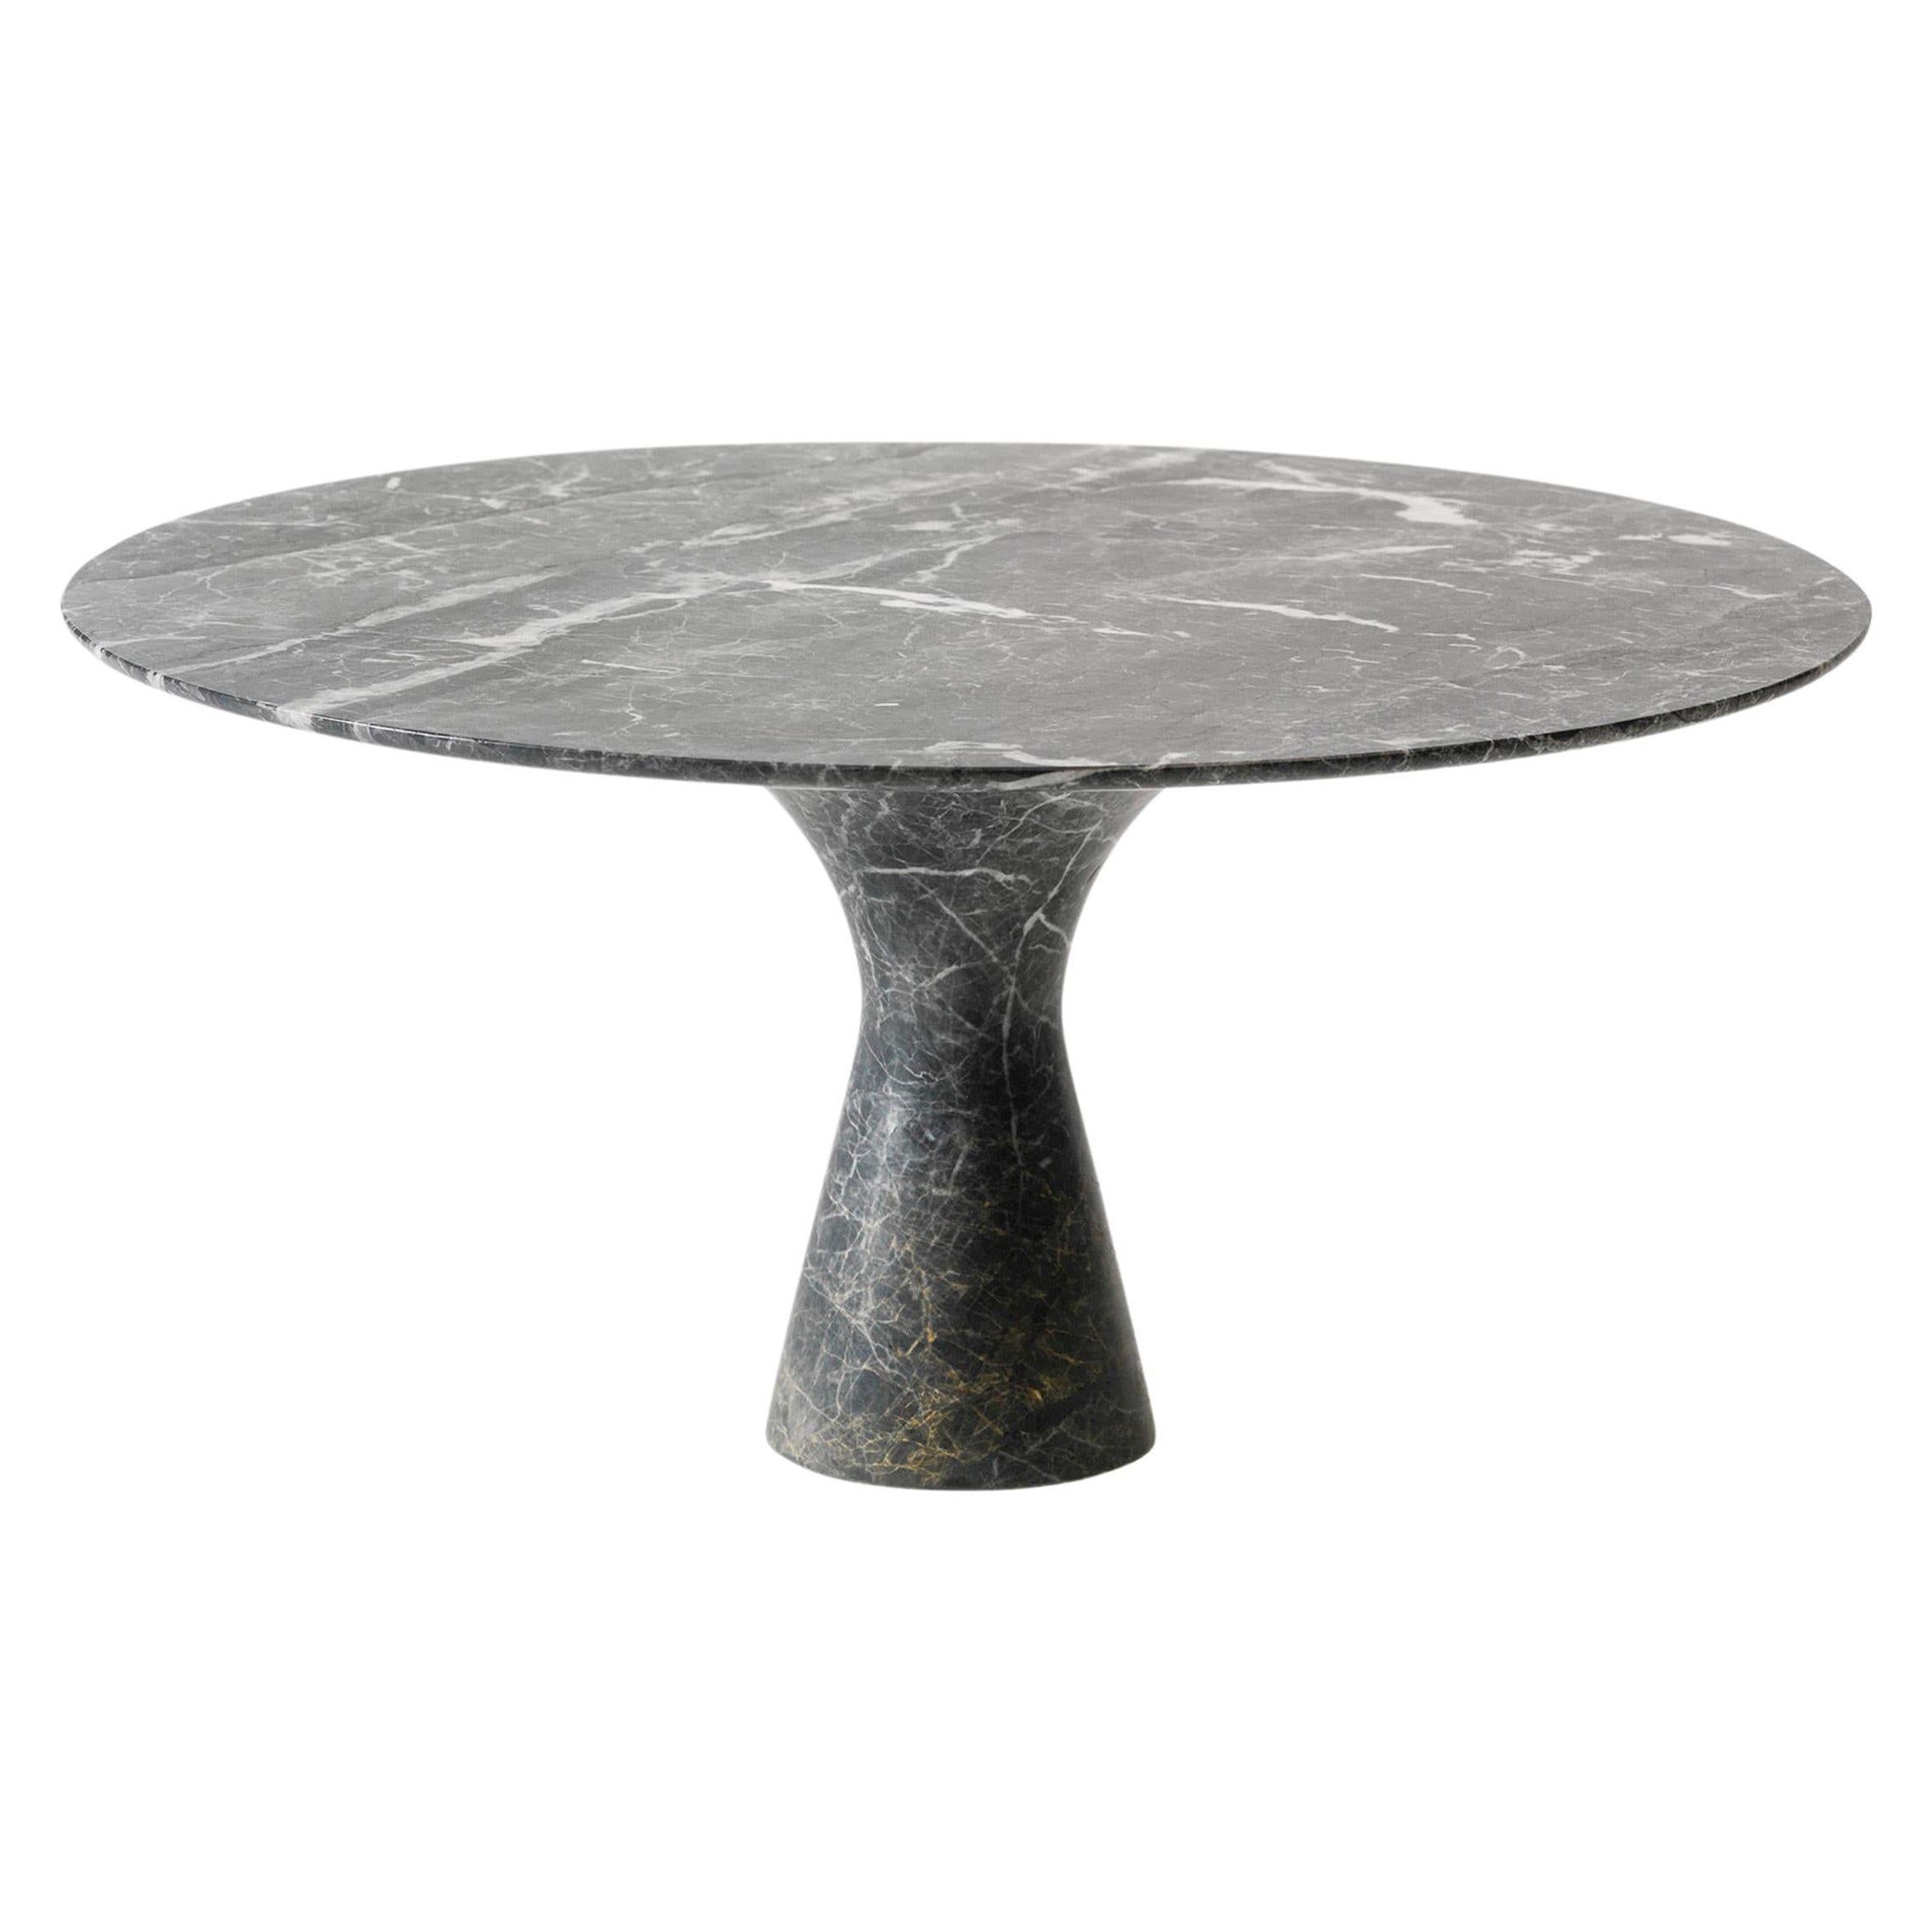 Grey Saint Laurent Refined Contemporary Marble Dining Table 130/75 For Sale